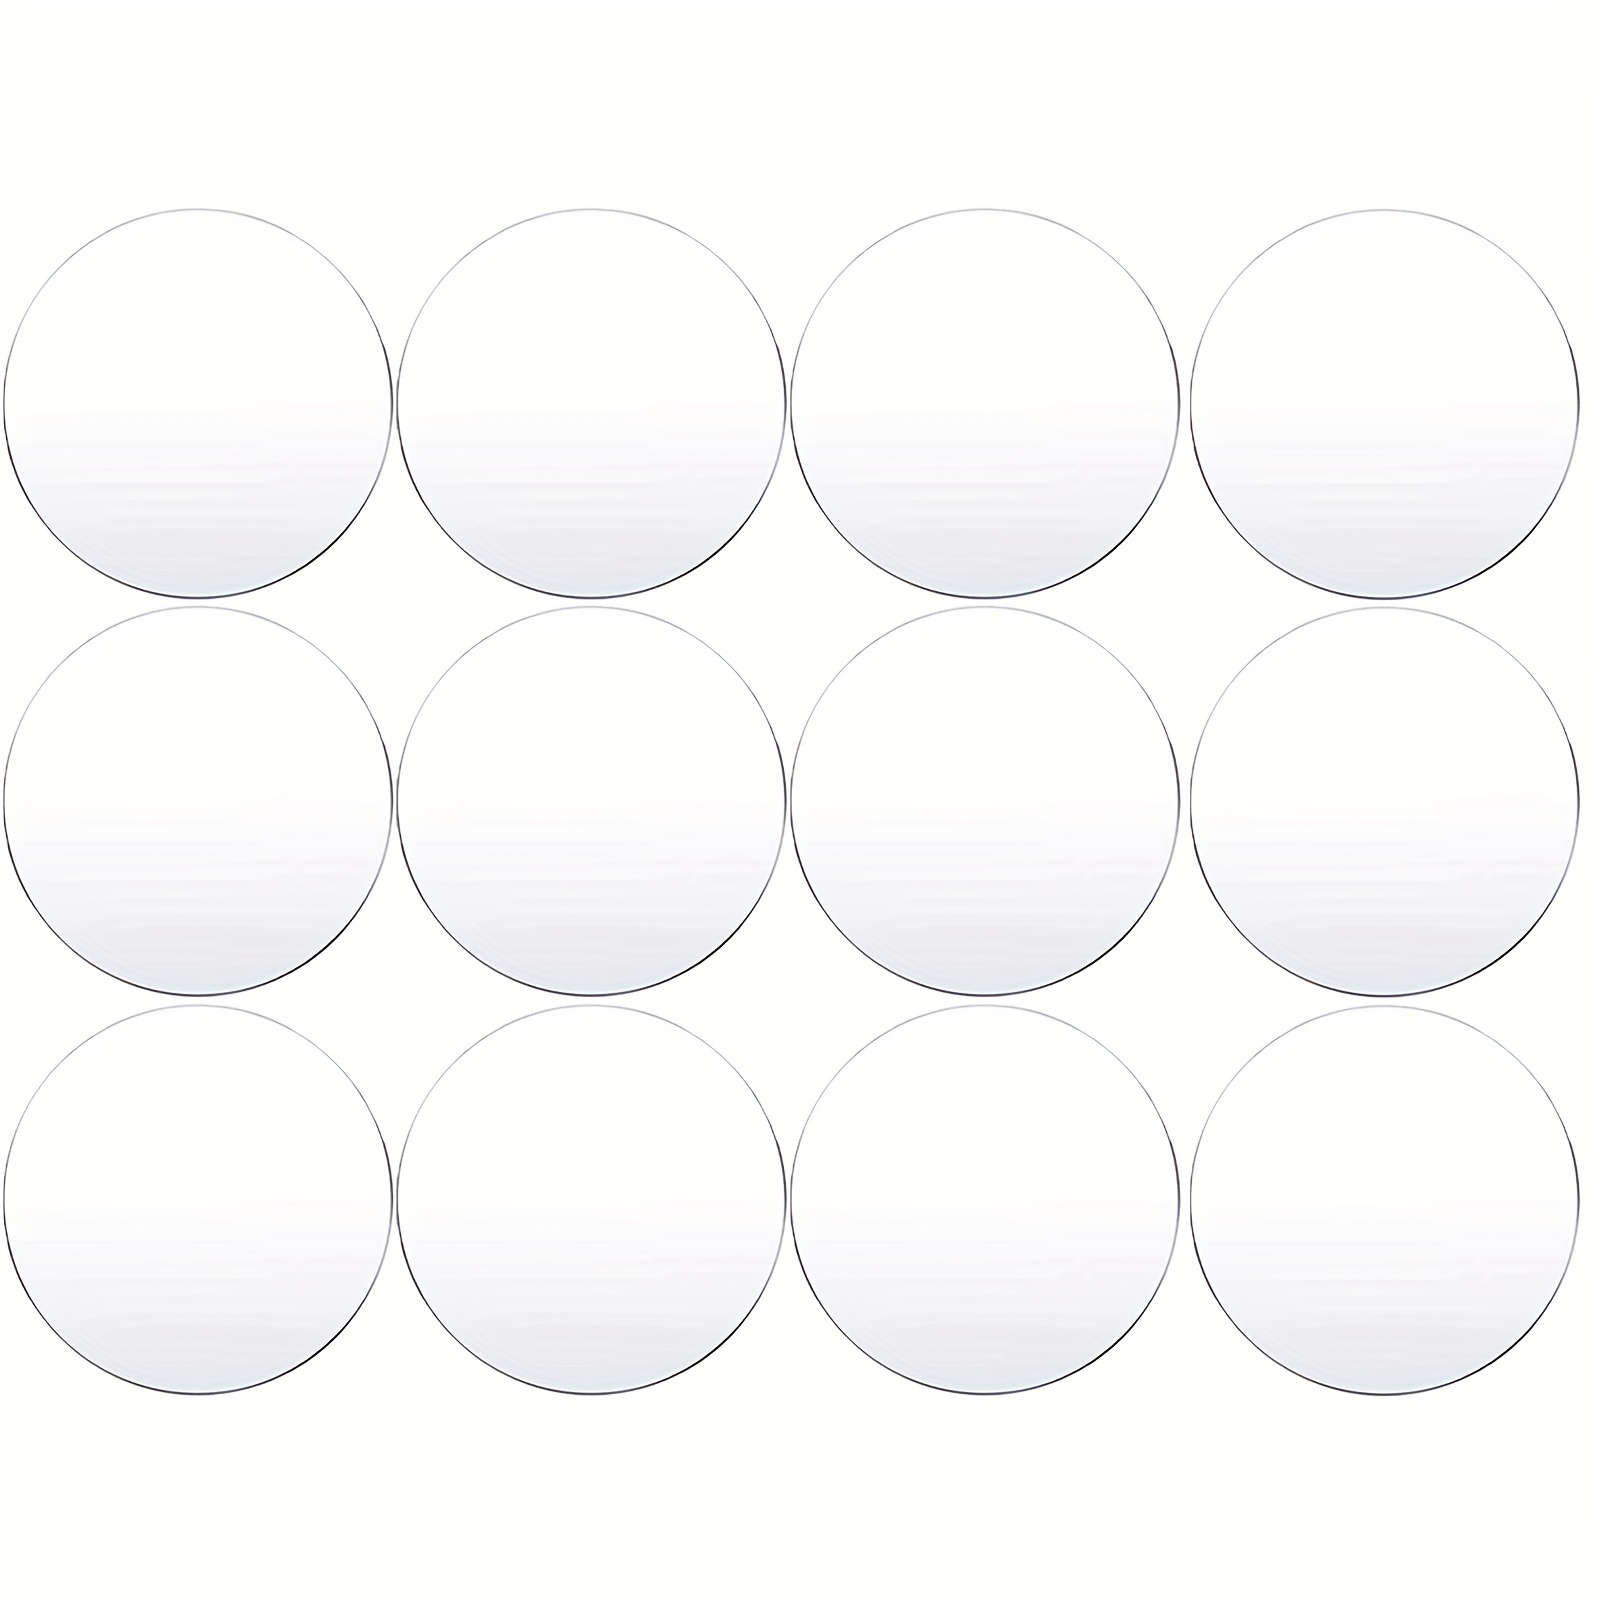 12pcs Clear Acrylic Circles Disc Transparent Round Disk Plastic Blank Panel  For DIY Project, Picture Frame, Art Craft, Festival Ornament (0.04 Inch Th